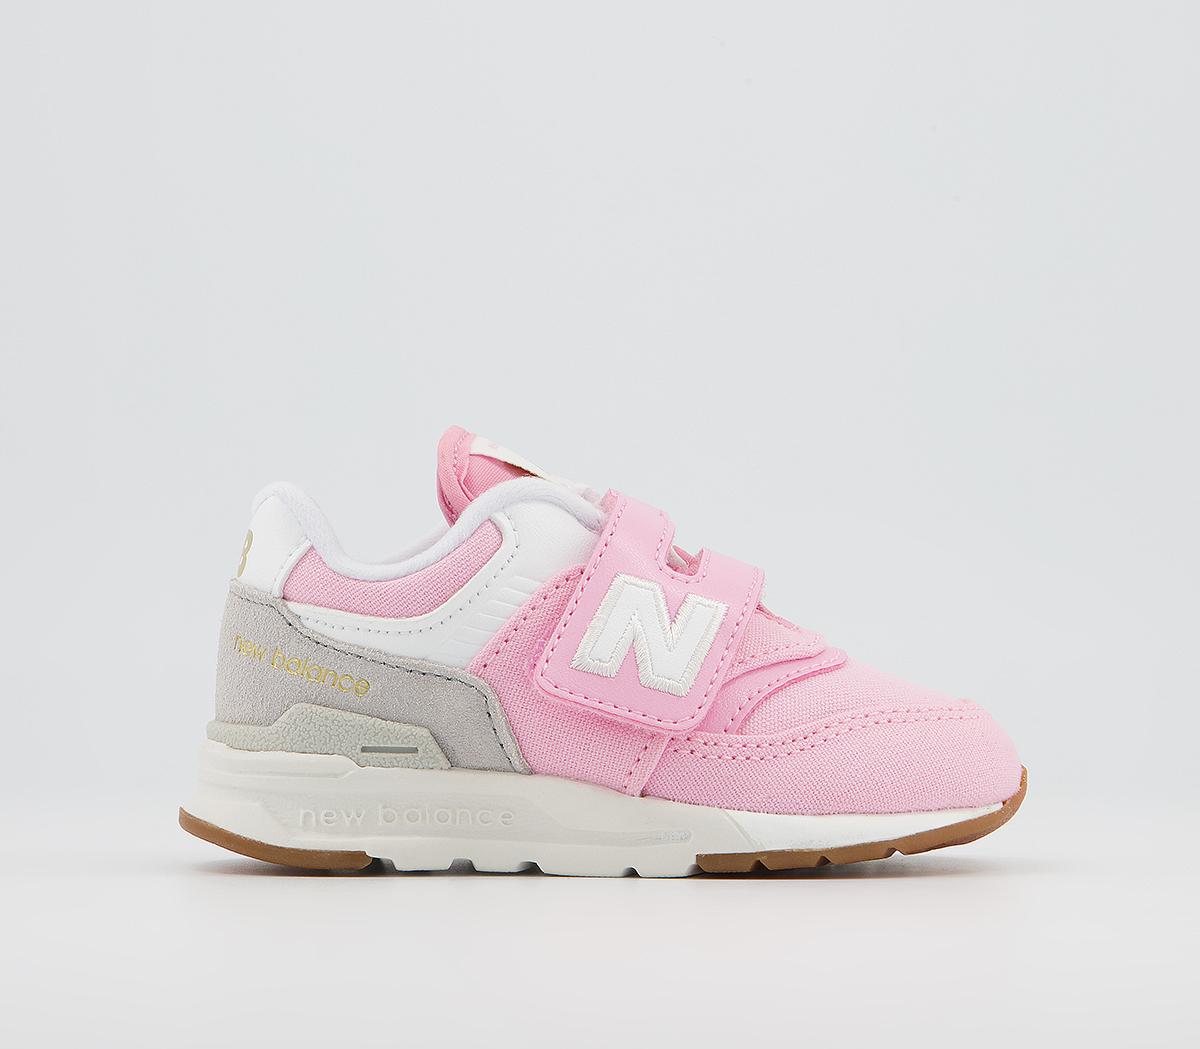 New Balance 997 Infant Trainers Pink White - Kids Trainers